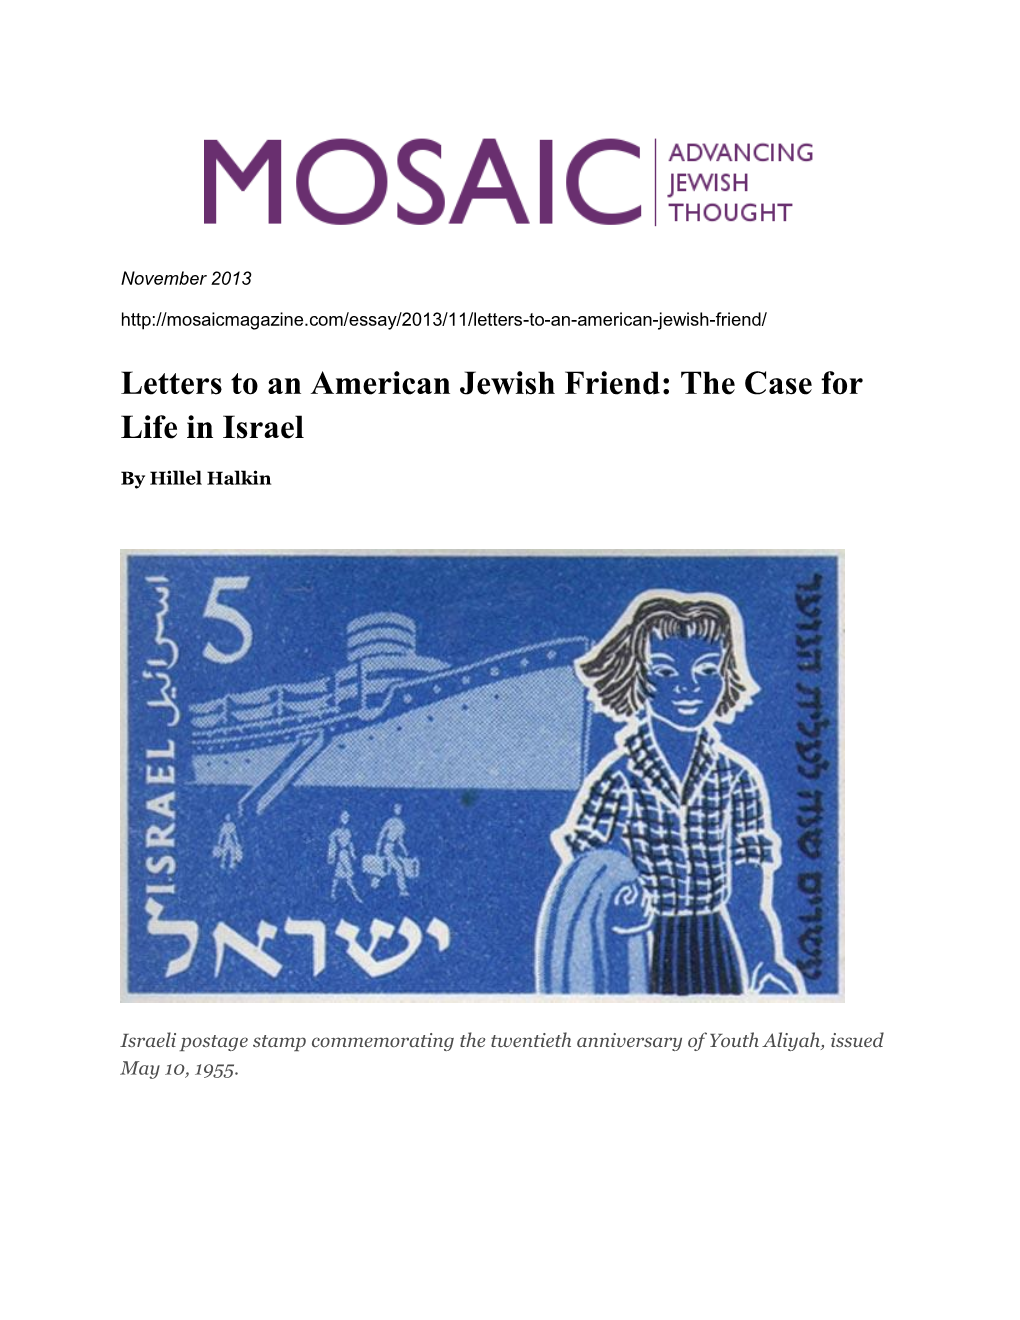 Letters to an American Jewish Friend: the Case for Life in Israel